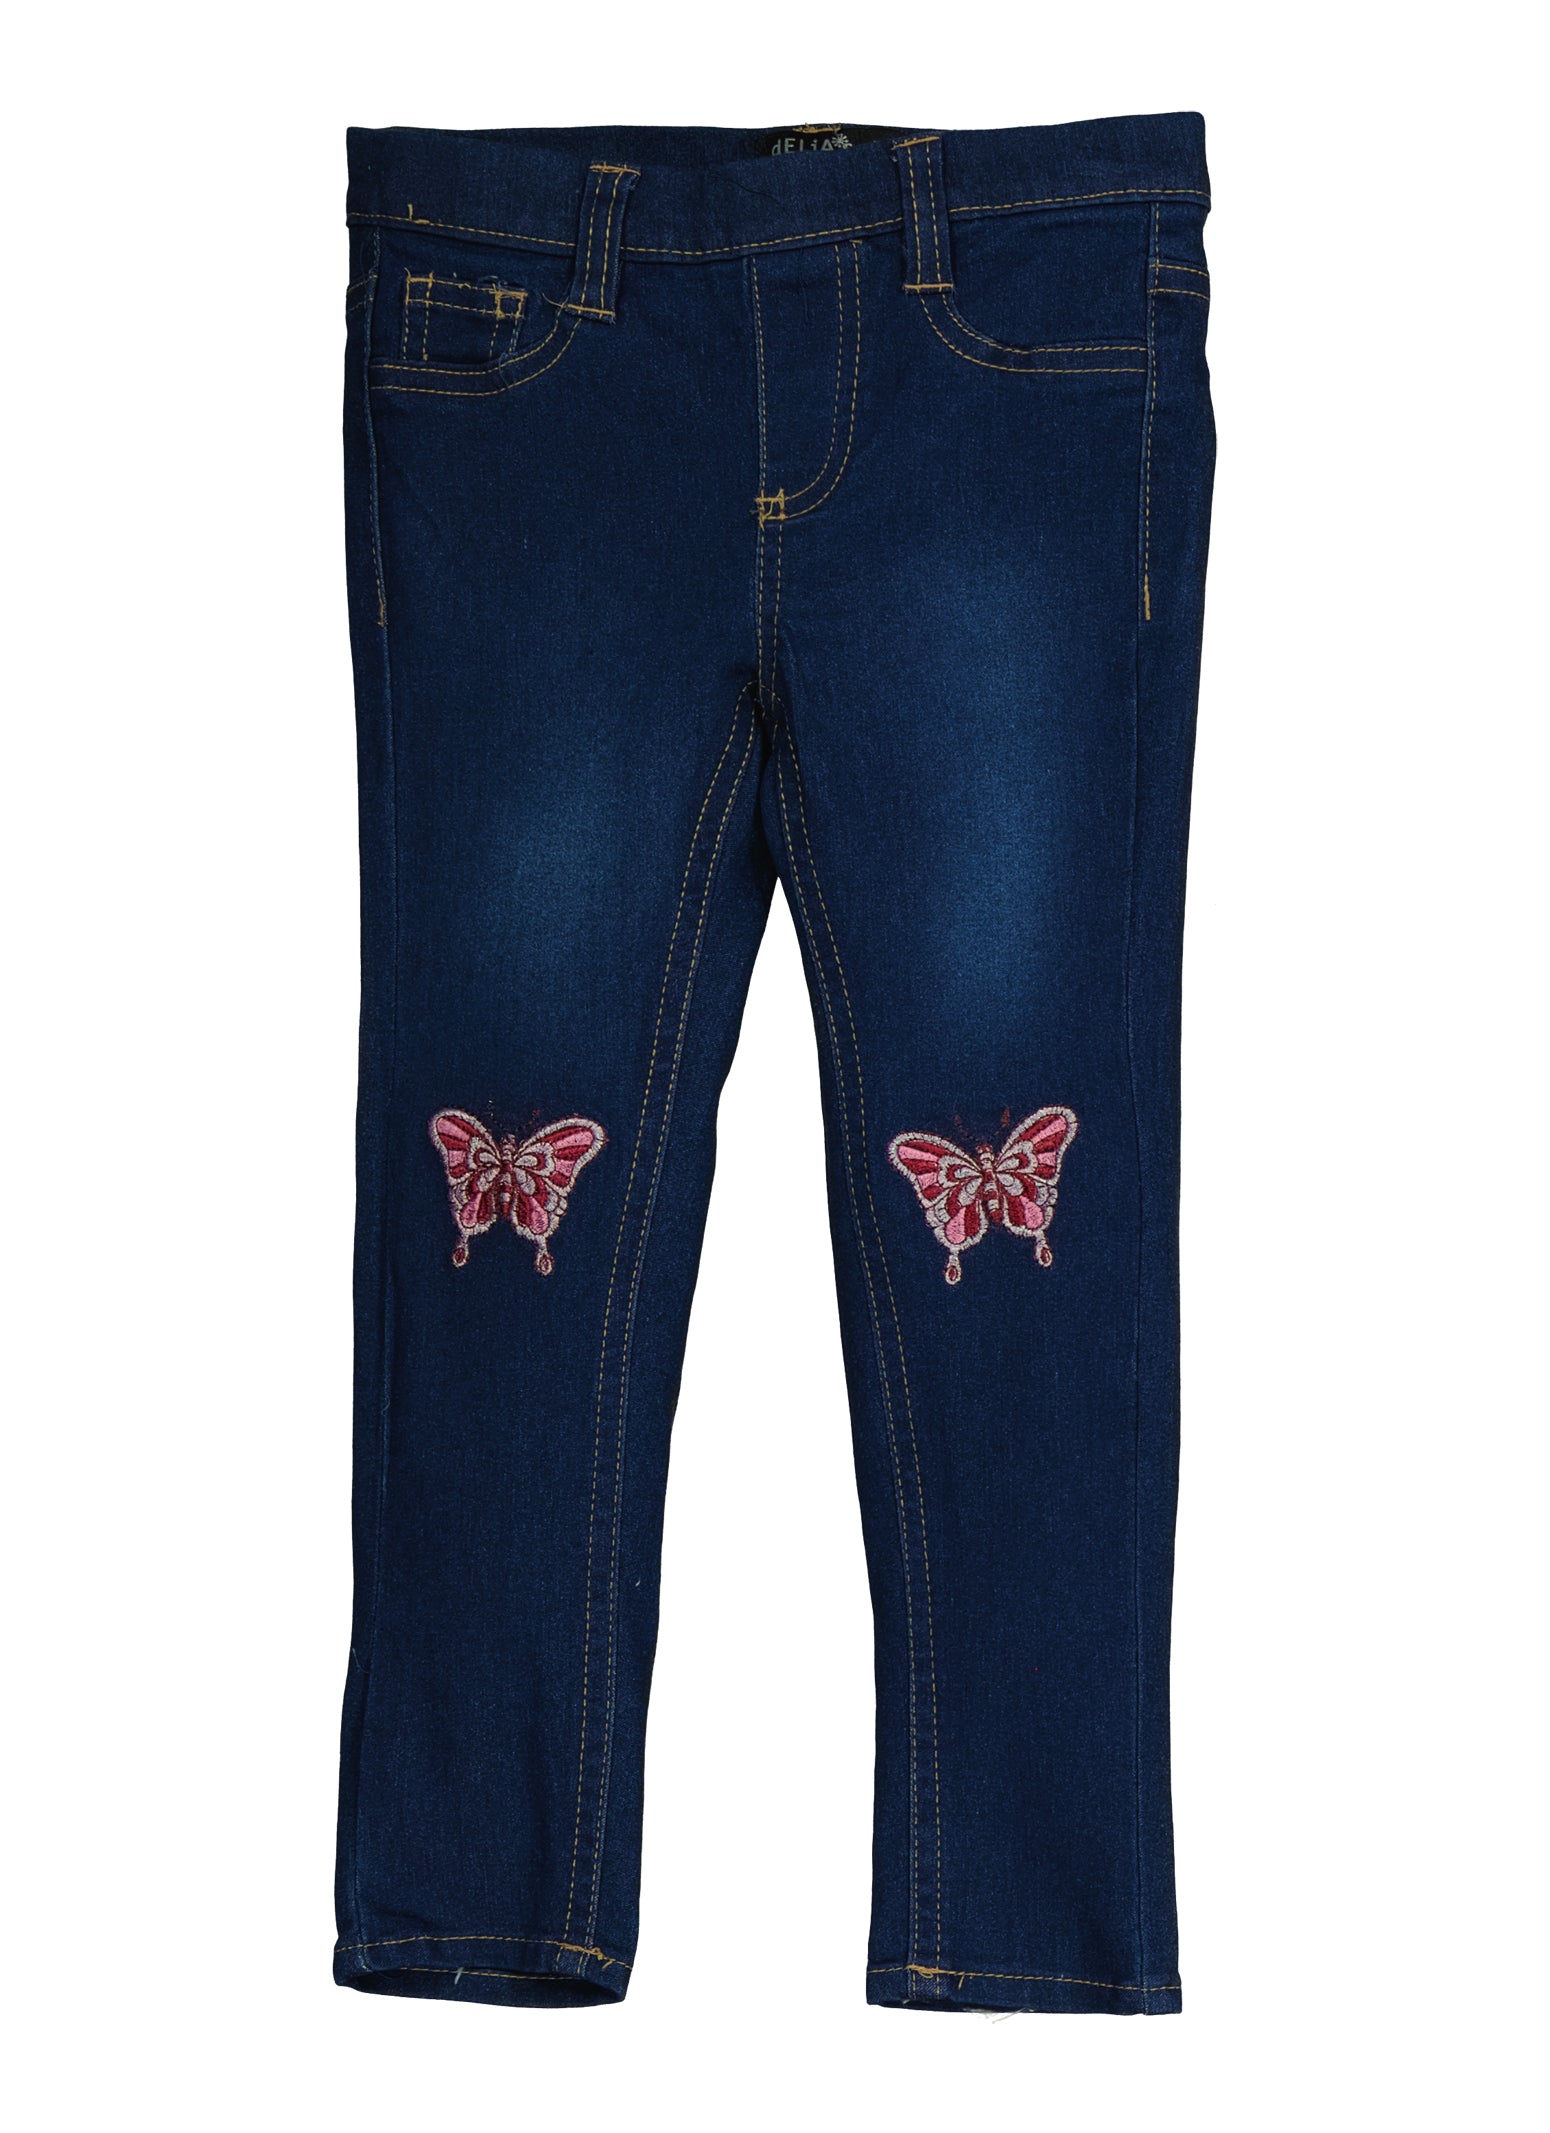 Little Girls Butterfly Embroidered Skinny Jeans, Blue, Size 4